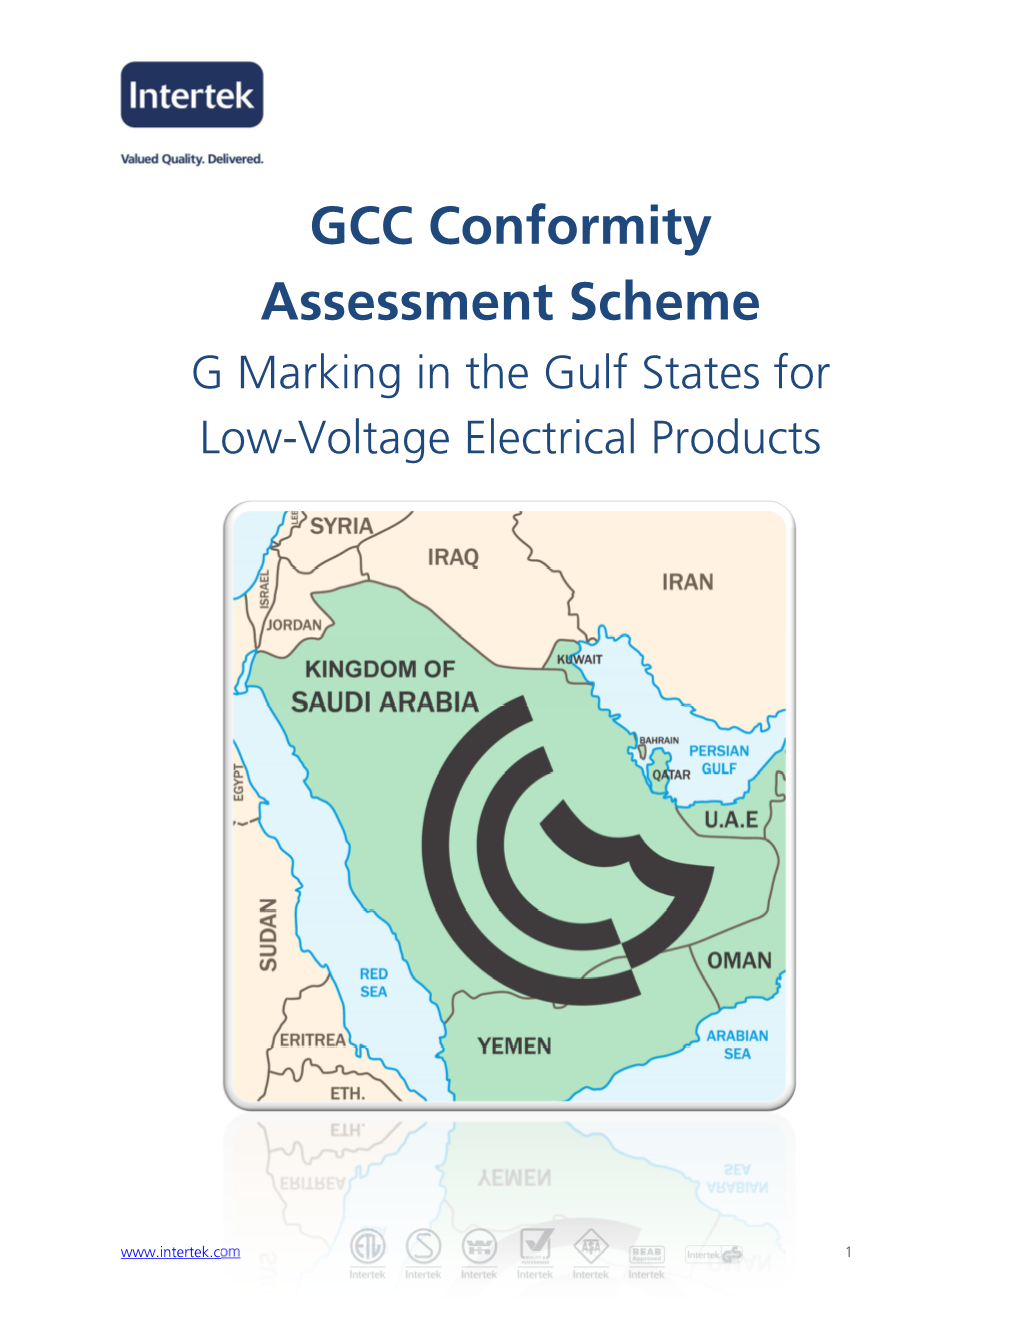 GCC Conformity Assessment Scheme G Marking in the Gulf States for Low-Voltage Electrical Products